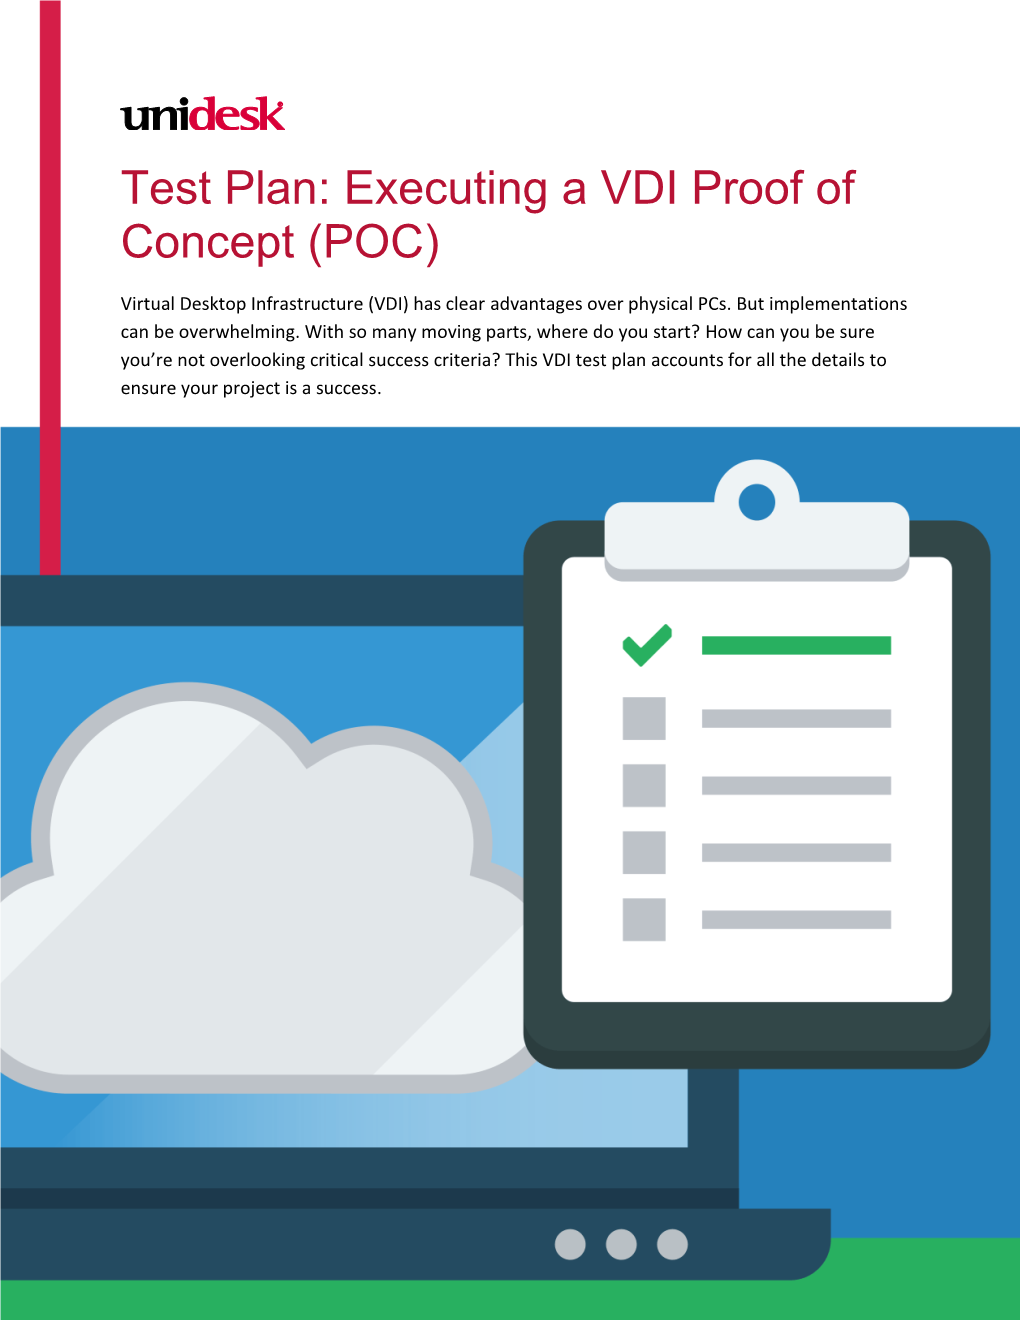 Test Plan: Executing a VDI Proof of Concept (POC)